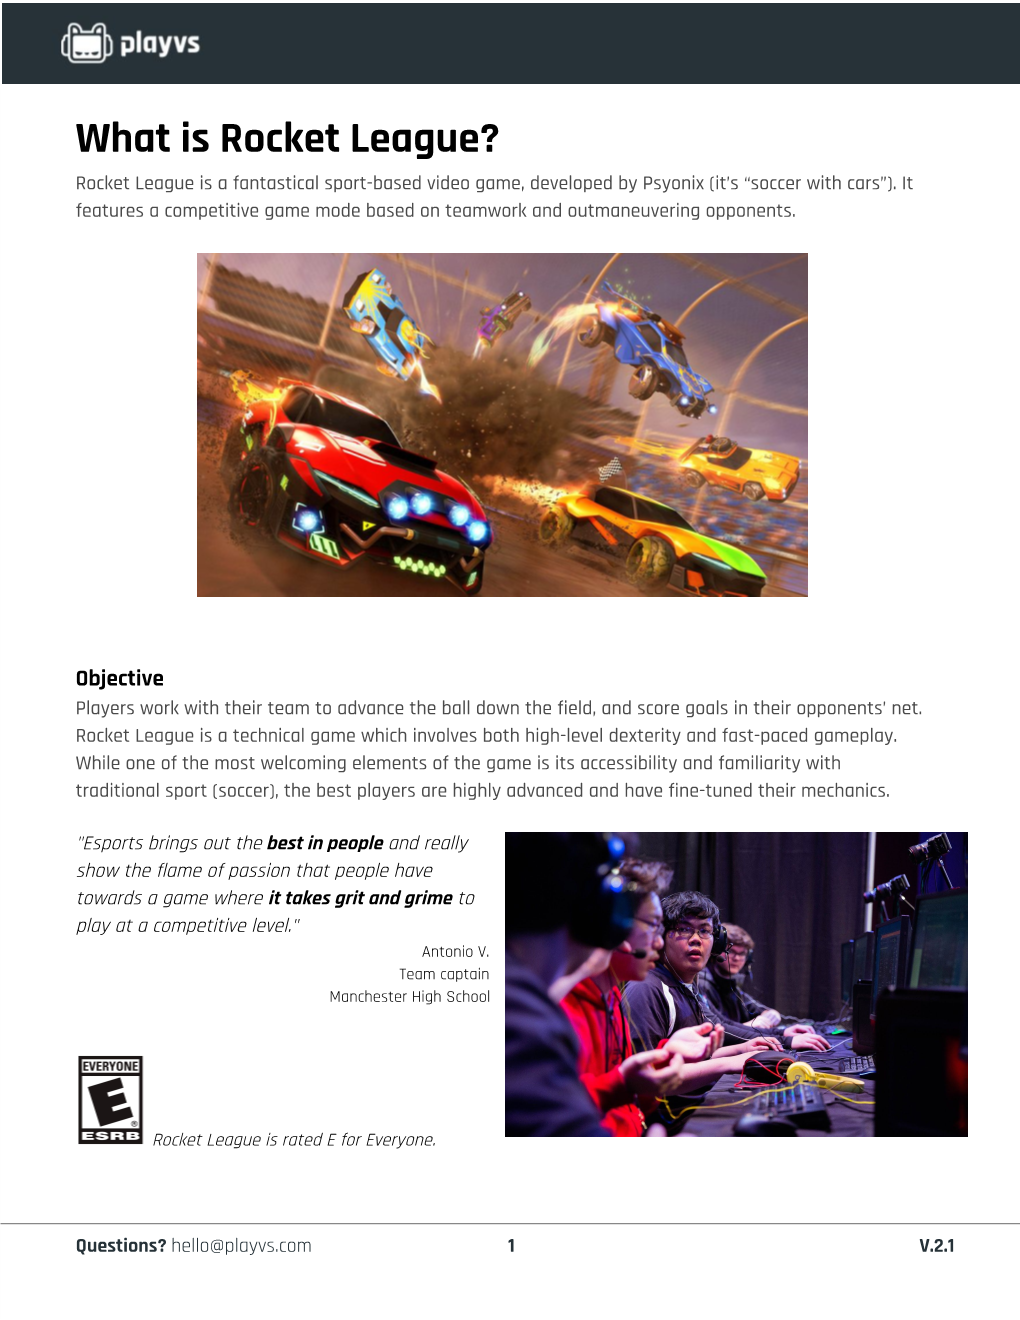 What Is Rocket League? Rocket League Is a Fantastical Sport-Based Video Game, Developed by Psyonix (It’S “Soccer with Cars”)